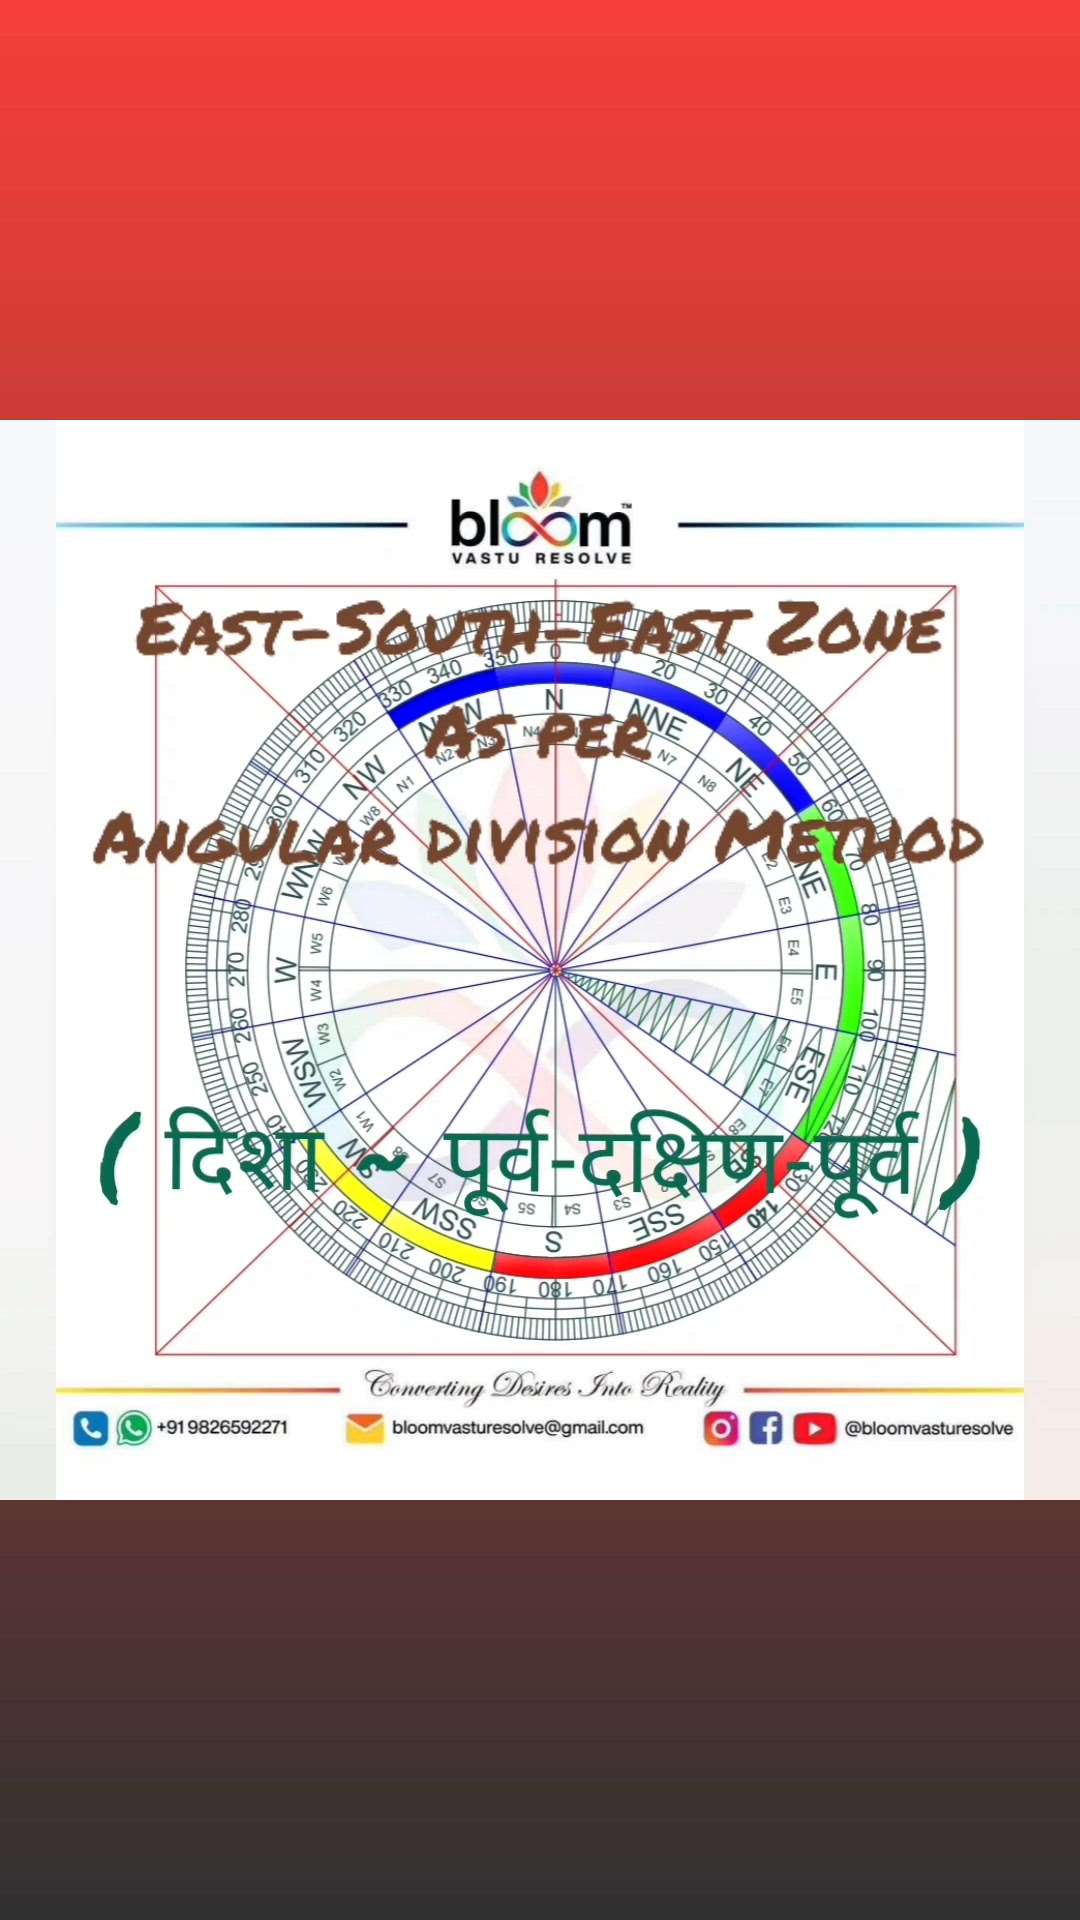 Your queries and comments are always welcome.
For more Vastu please follow @bloomvasturesolve
on YouTube, Instagram & Facebook
.
.
For personal consultation, feel free to contact certified MahaVastu Expert MANISH GUPTA through
M - 9826592271
Or
bloomvasturesolve@gmail.com

#vastu 
#mahavastu #mahavastuexpert
#bloomvasturesolve
#VastuForHealthhealth
#healthvastu
#esezone 
#vastulogy